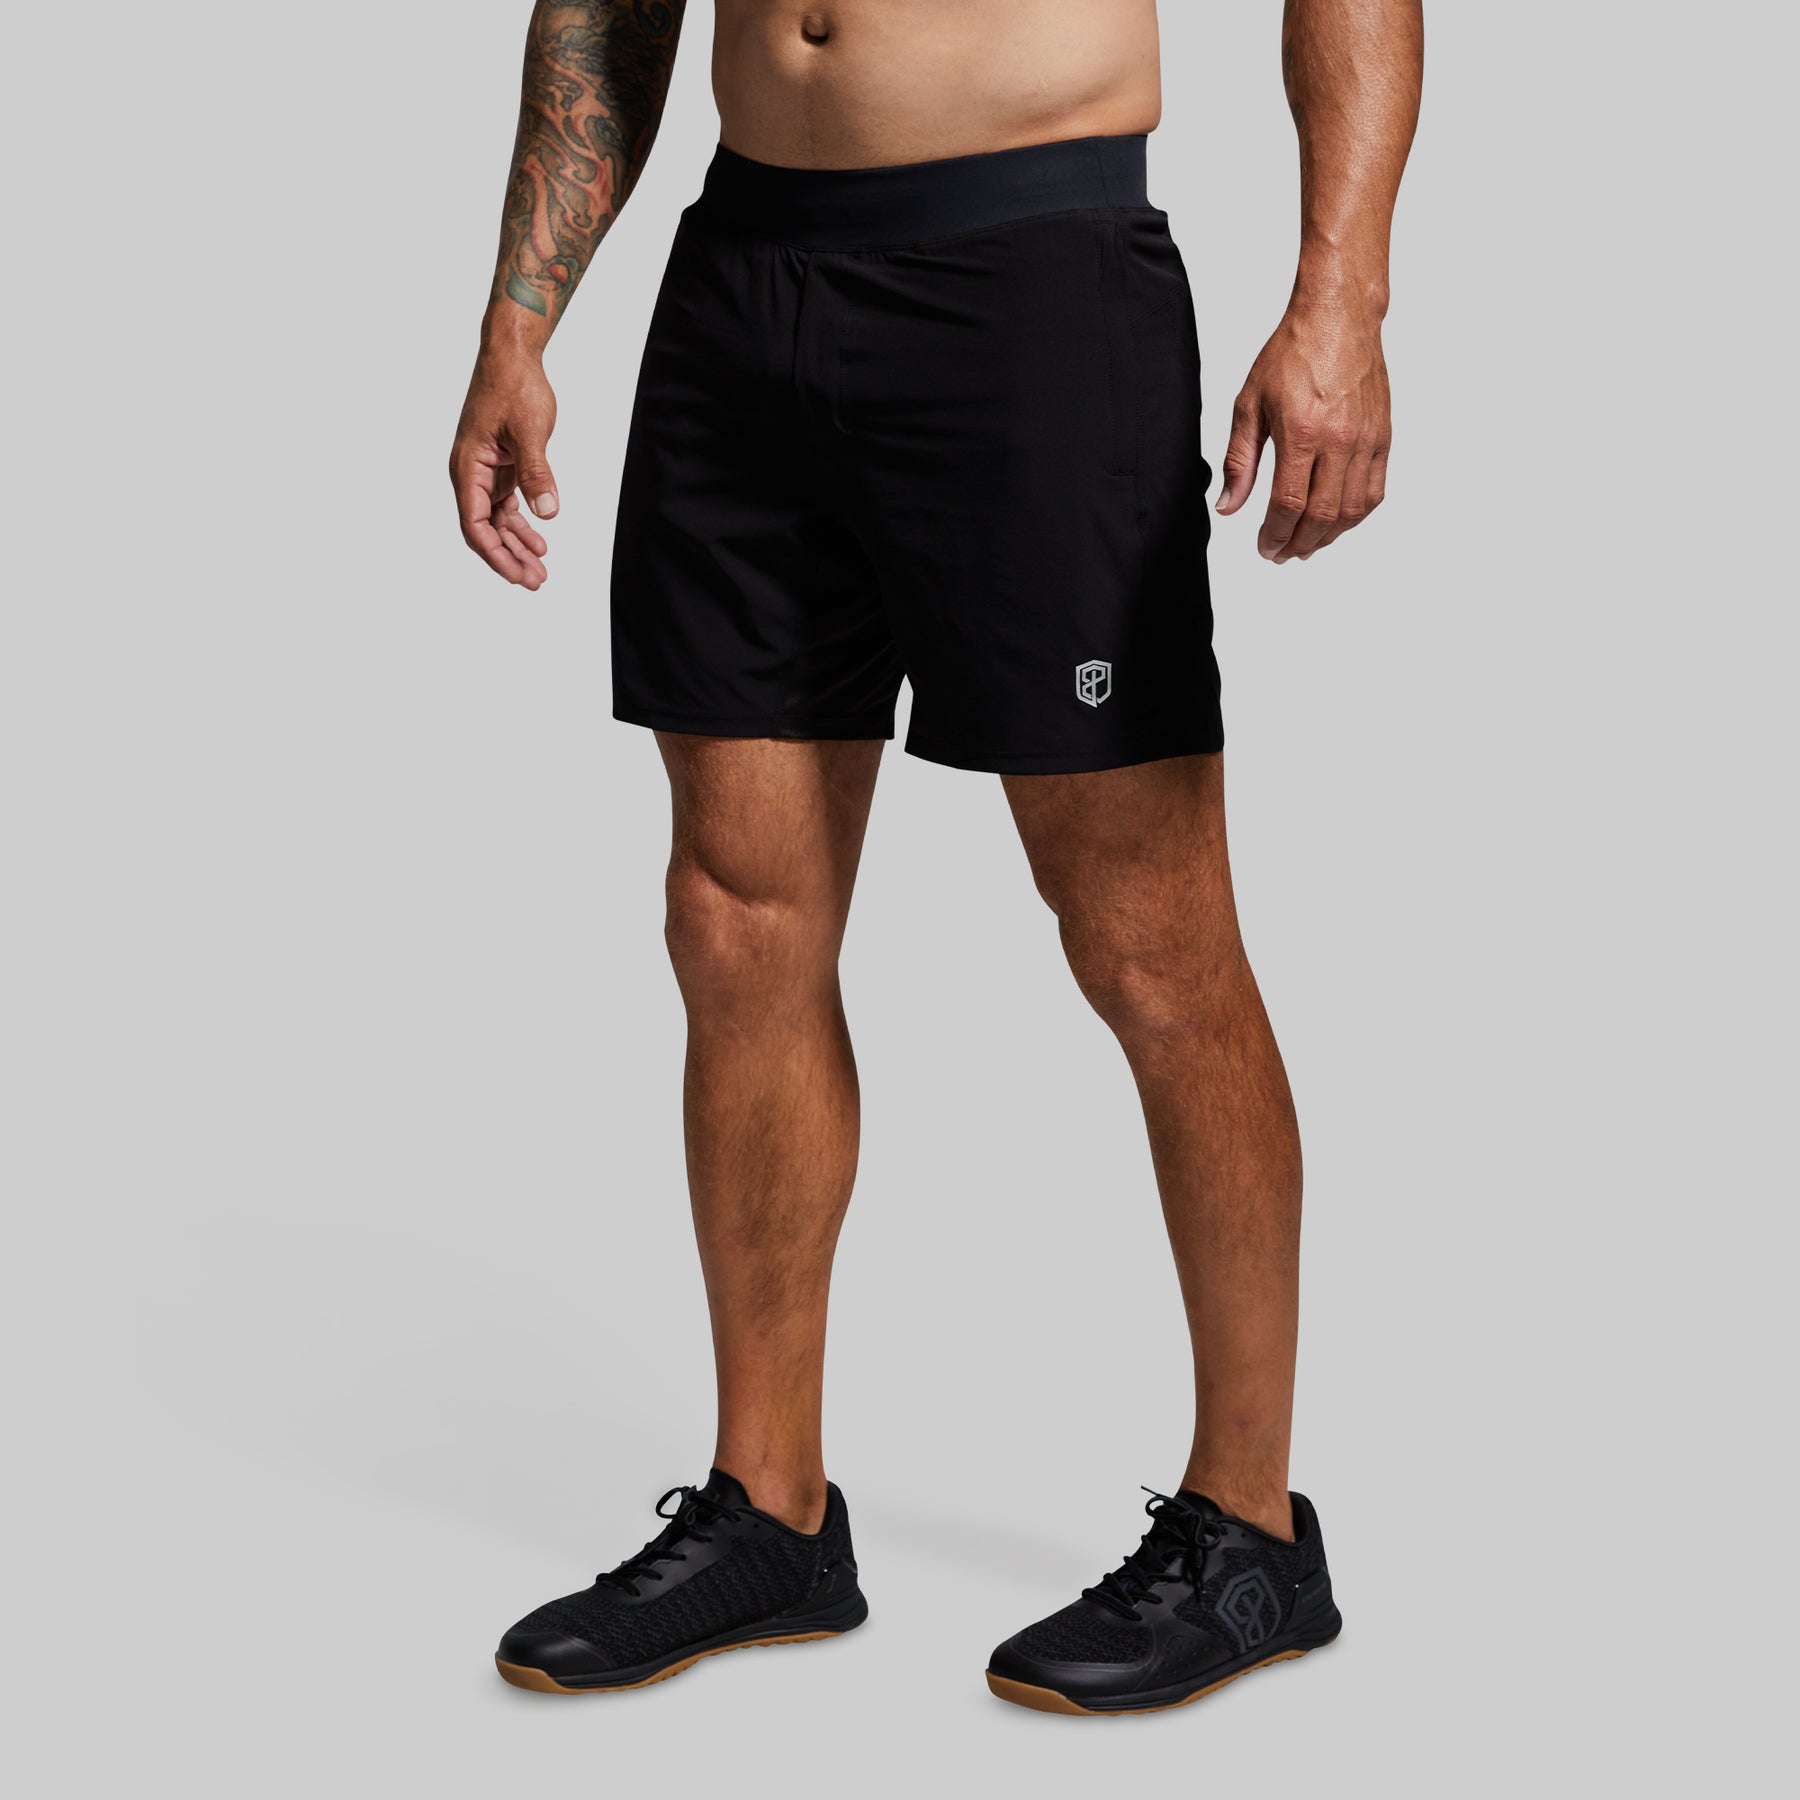 From a Pair of Homemade Compression Shorts to Launching a Training Shoe: An  Inside Look at Born Primitive's Journey in CrossFit - Morning Chalk Up